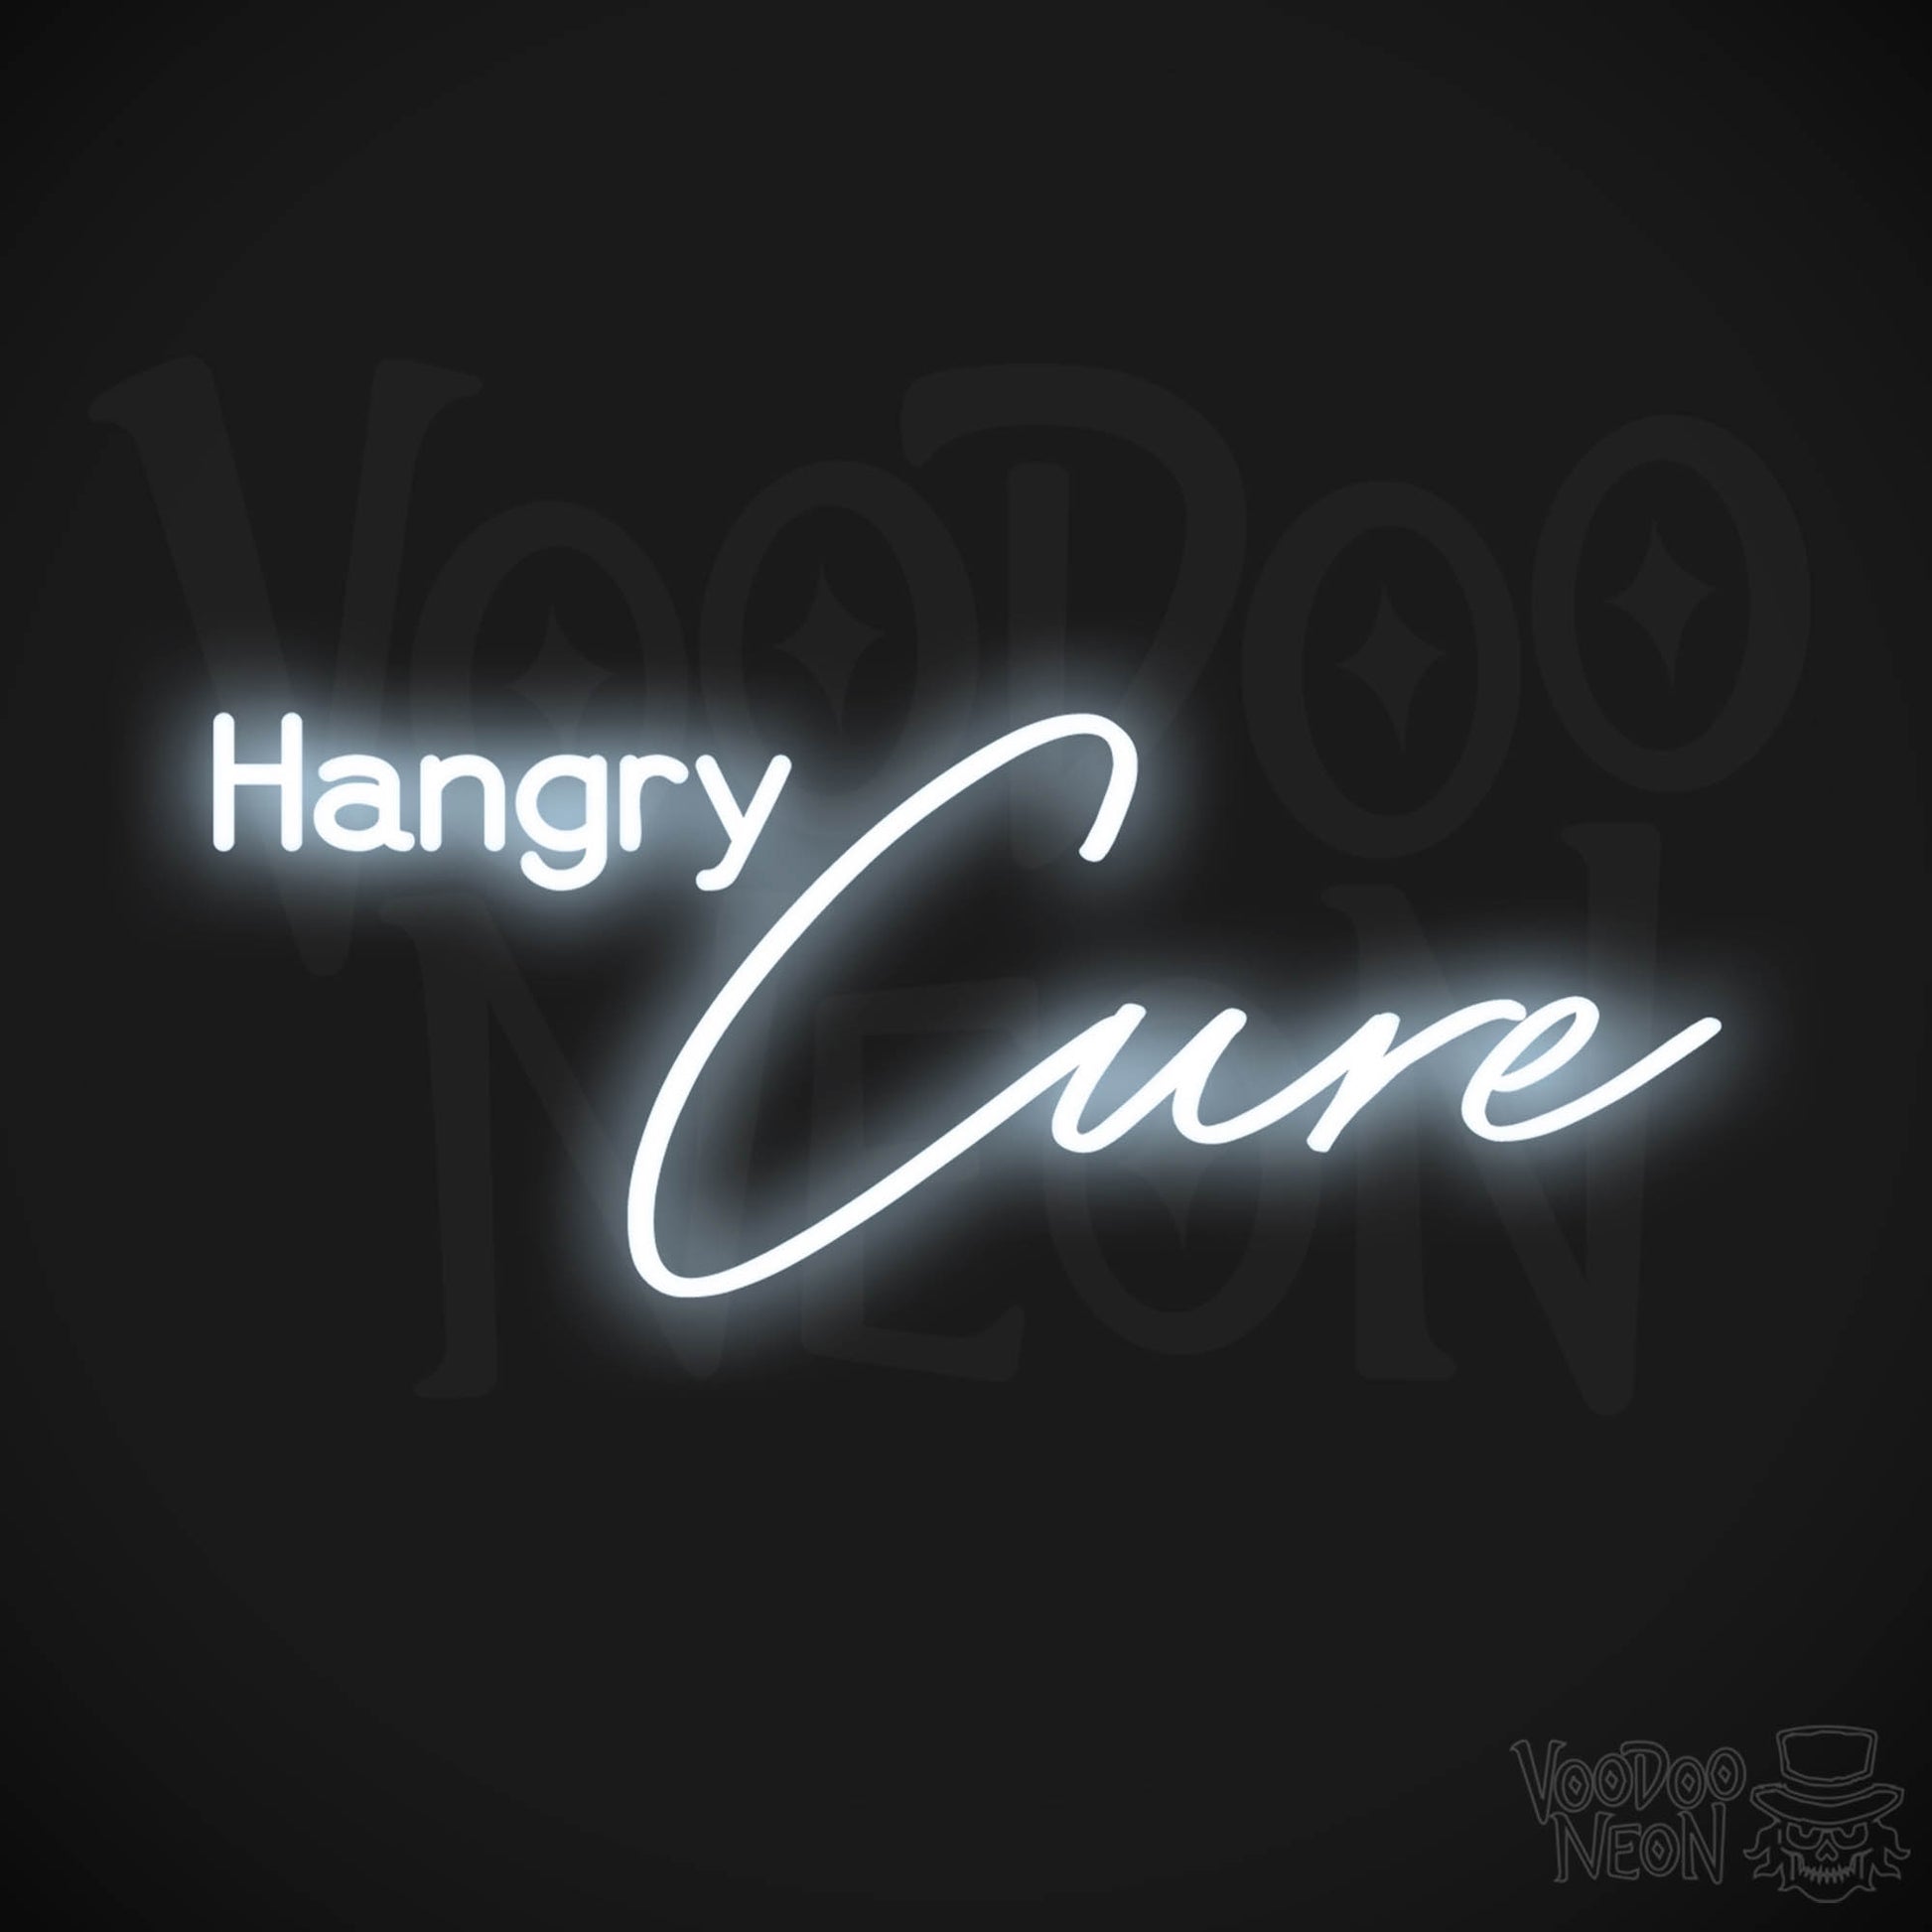 Hangry Cure LED Neon - Cool White